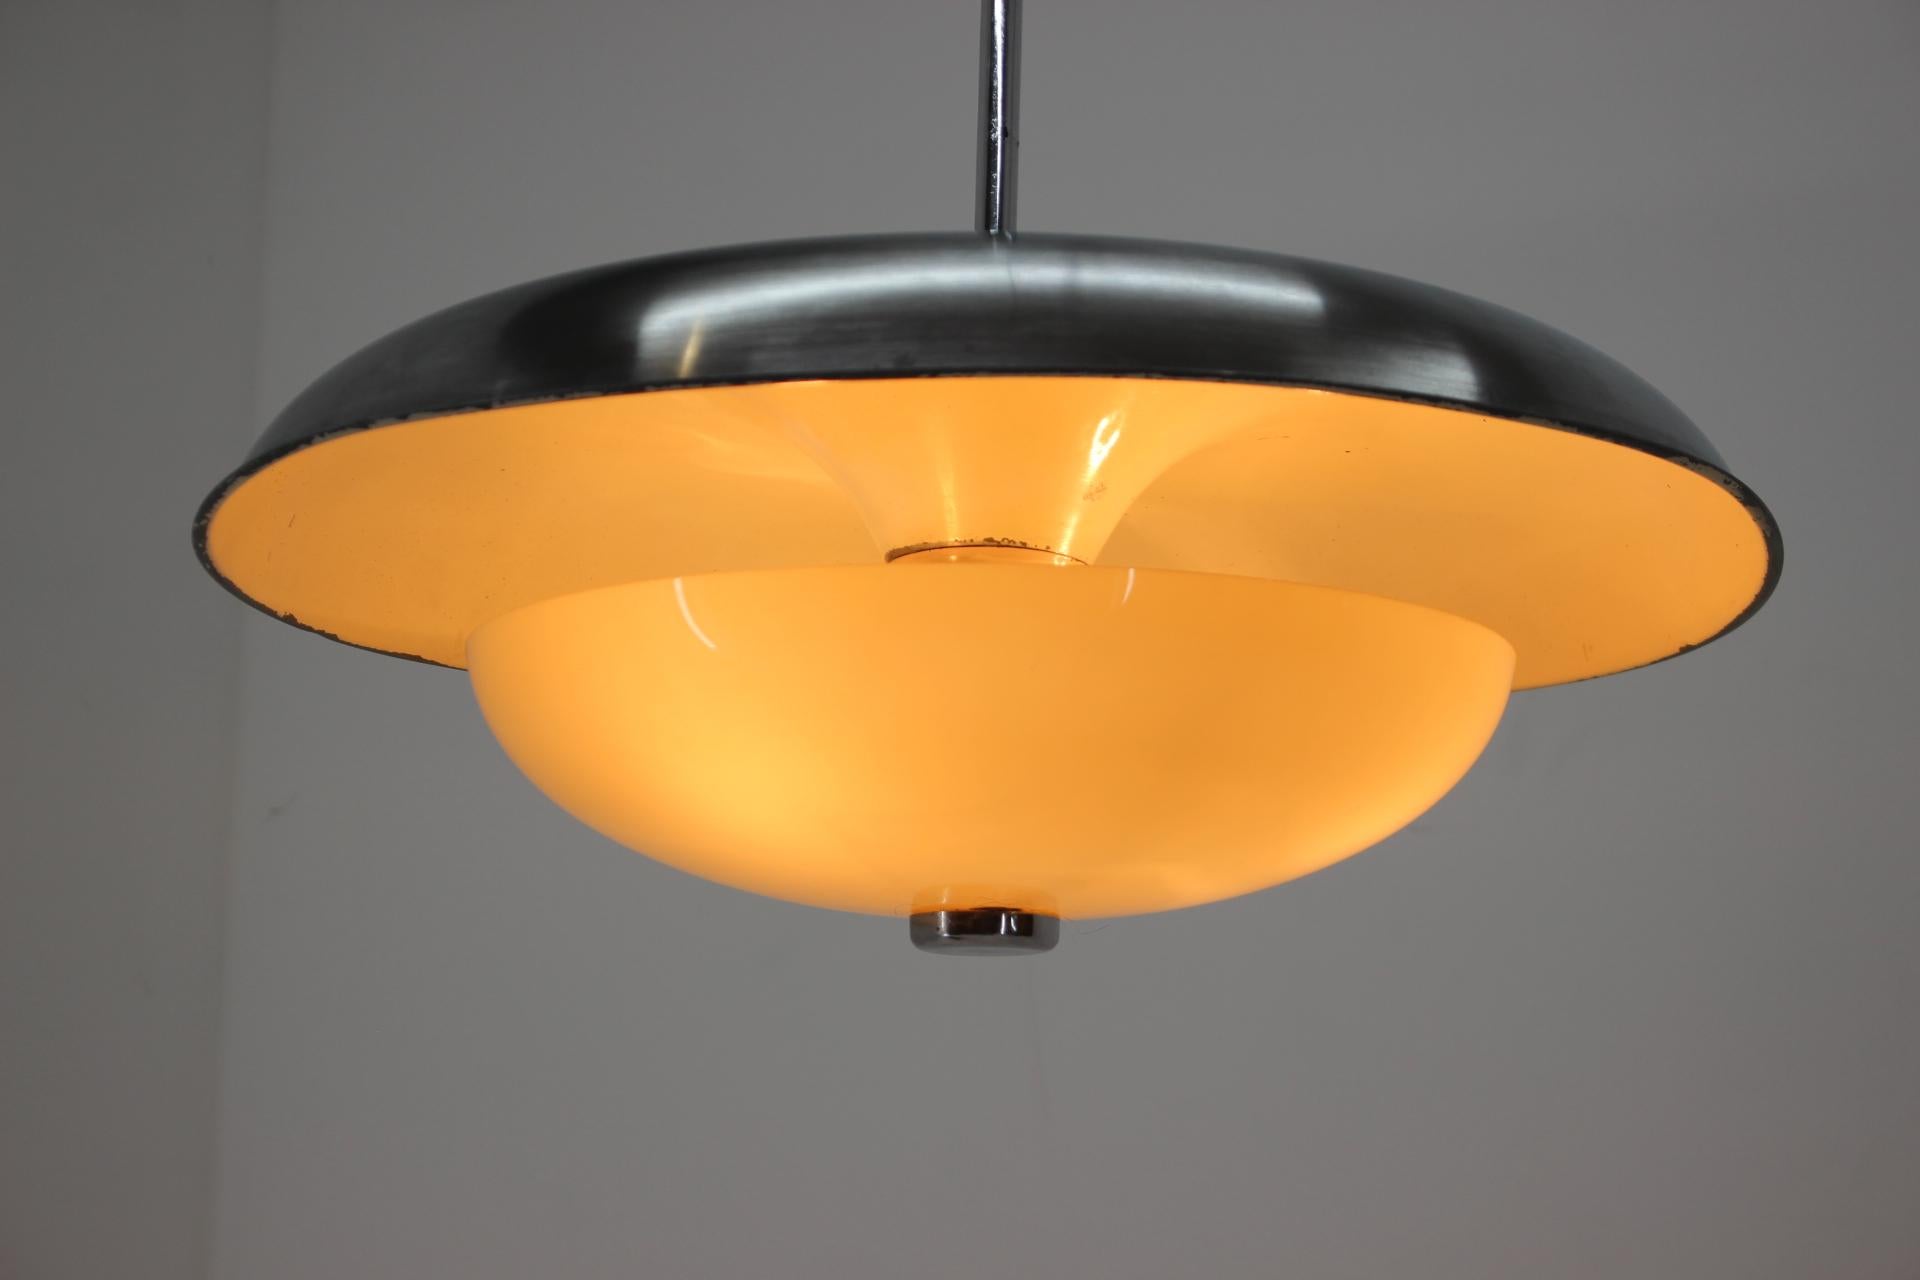 Aluminium and Glass Bauhaus / Functionalism Pendant - 1930s / Czechoslovakia  In Good Condition For Sale In Praha, CZ